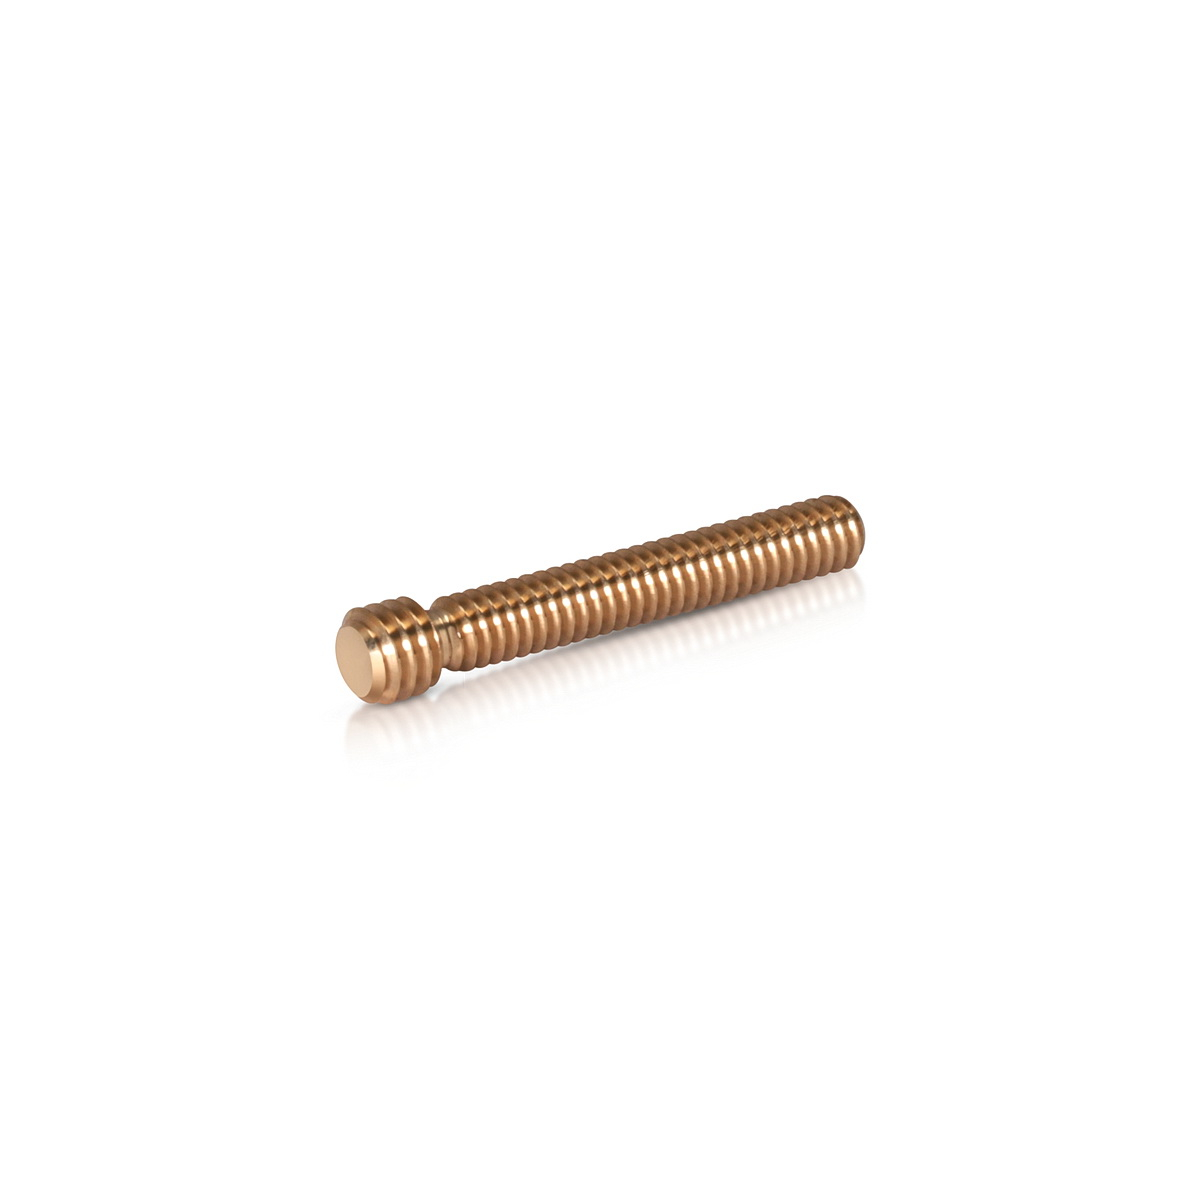 5/16-18 to 1/4-20 Conversion Set Screw, Total Length: 1 13/16''